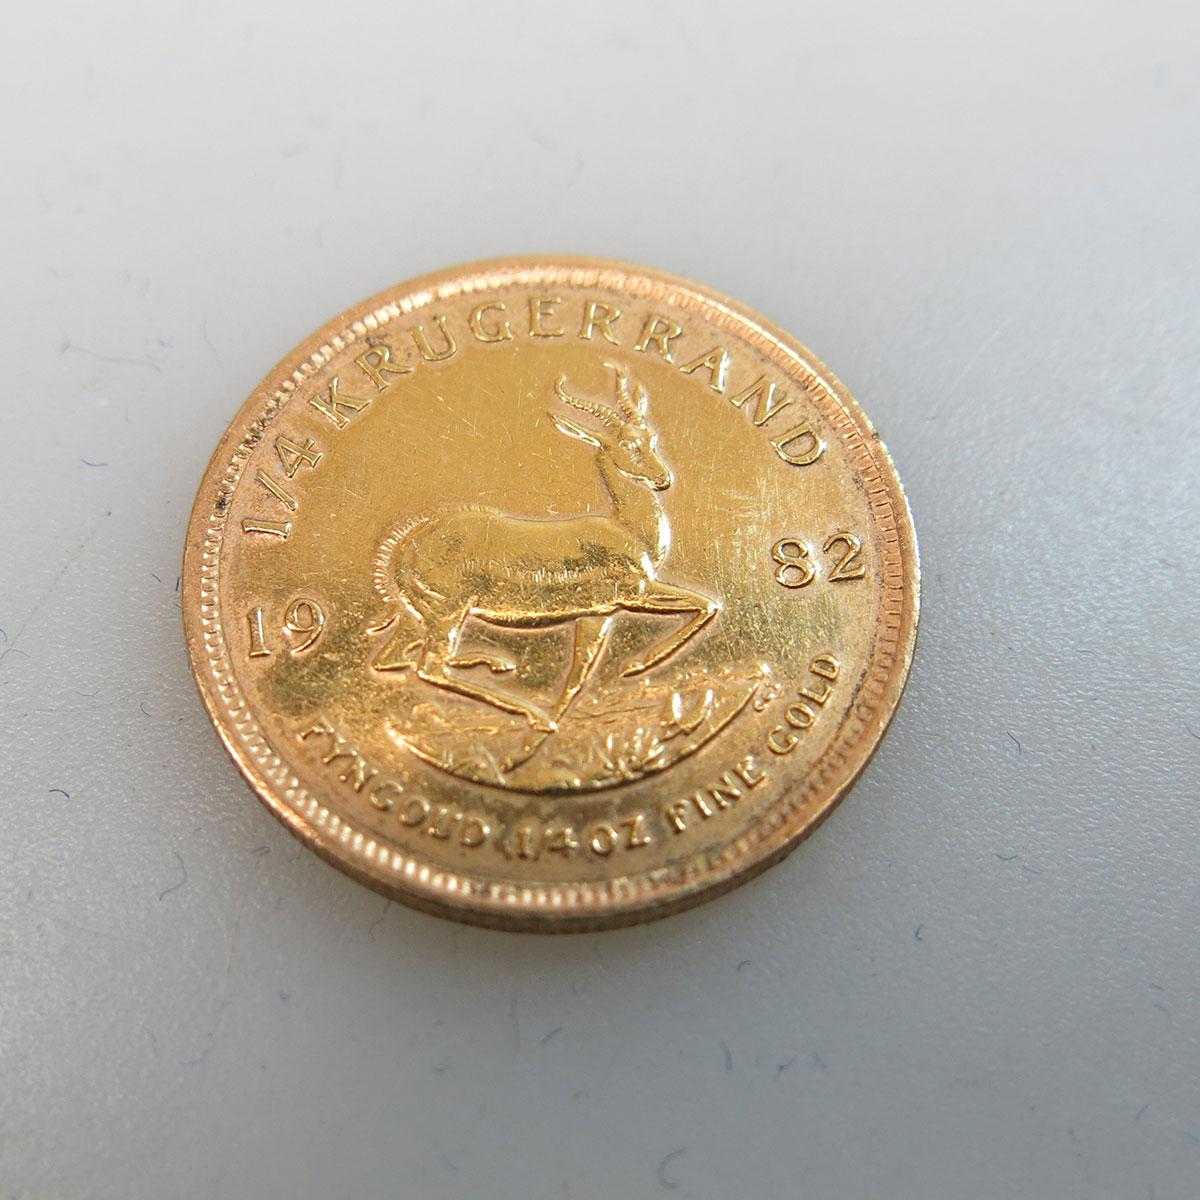 South African 1982 1/4 Krugerrand Gold Coin